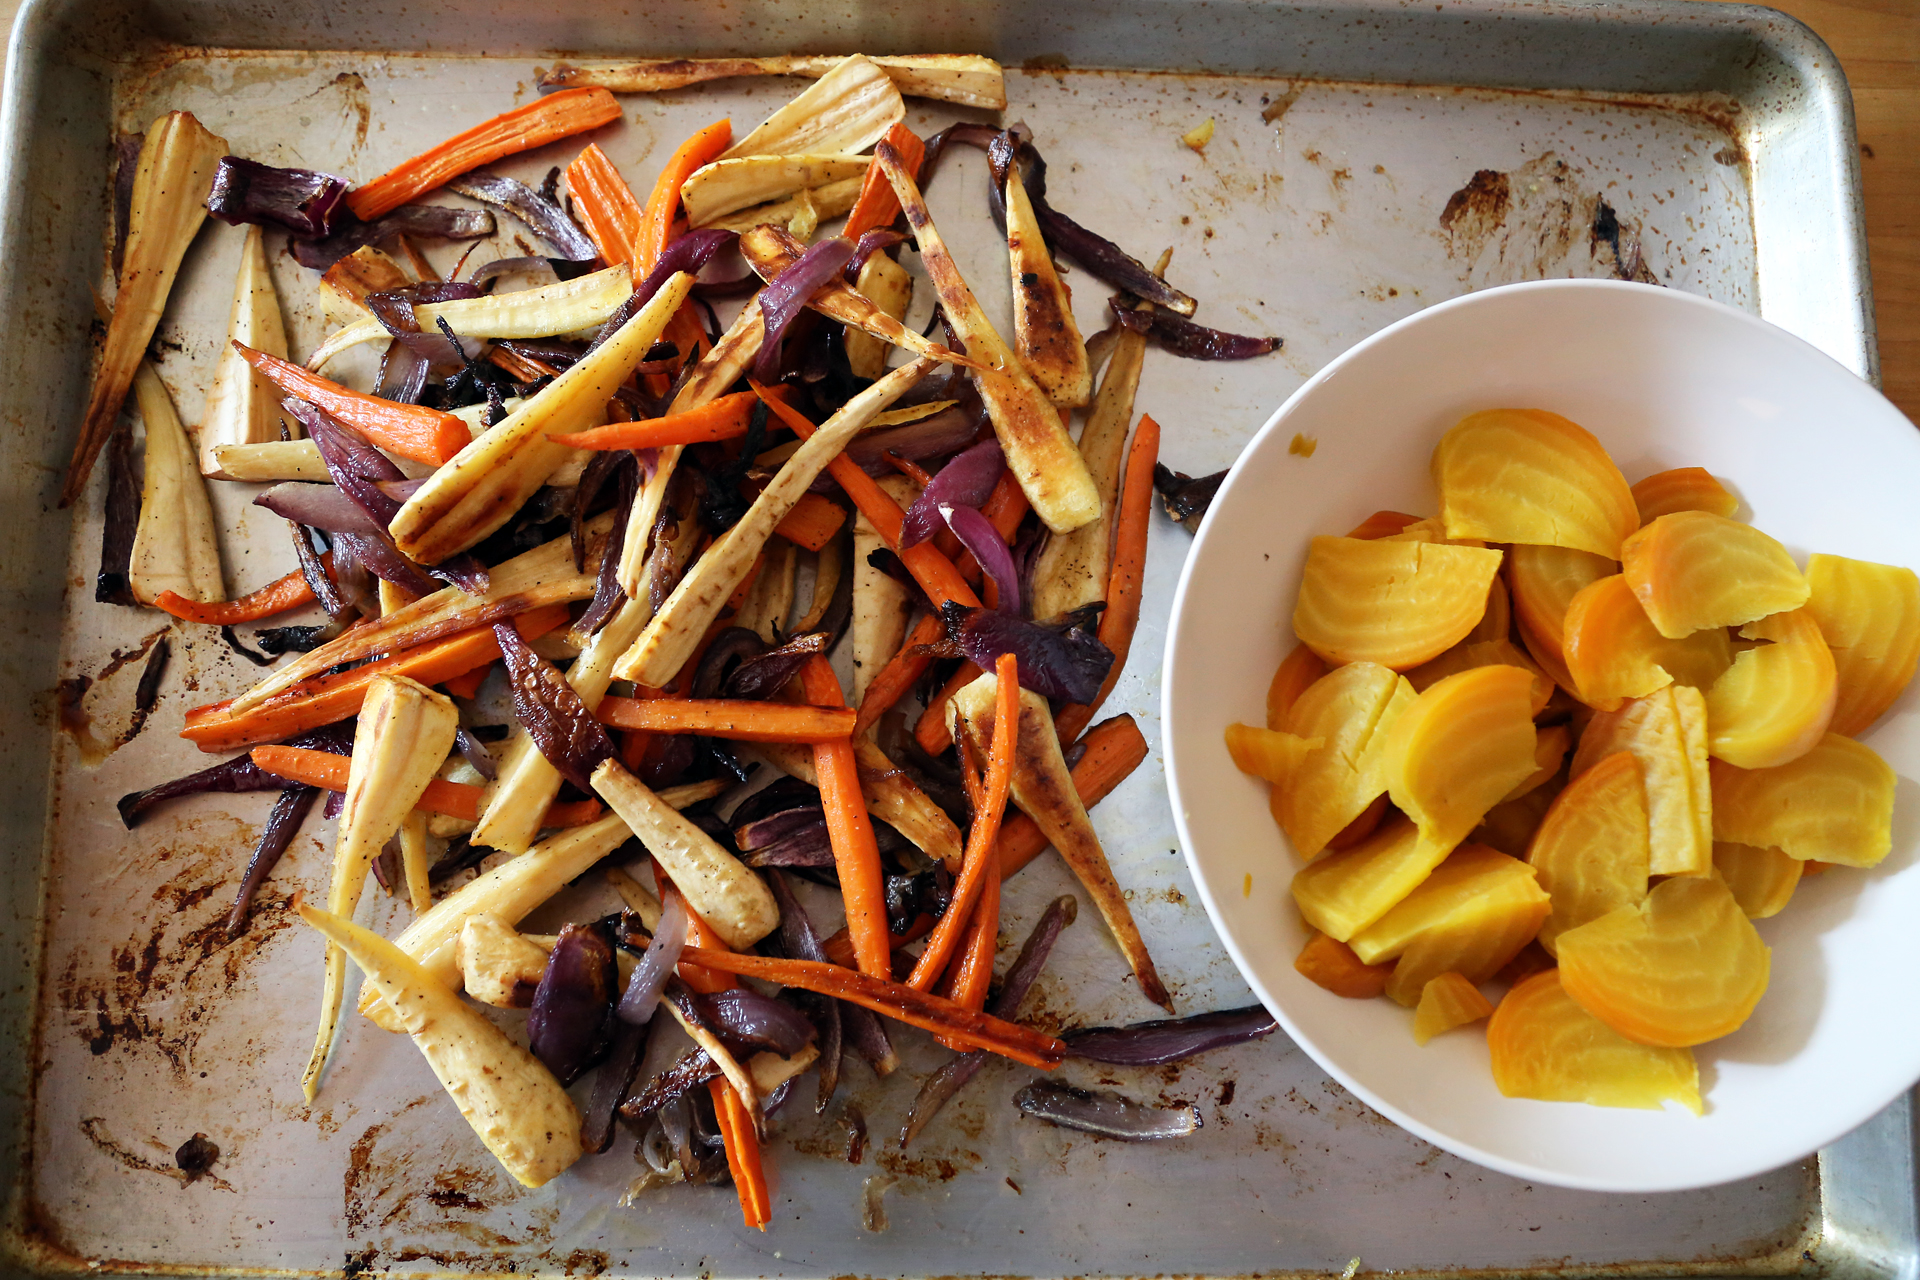 Roast the vegetables until just tender, about 40 minutes, turning occasionally for even cooking. Let cool to room temperature on the pan.